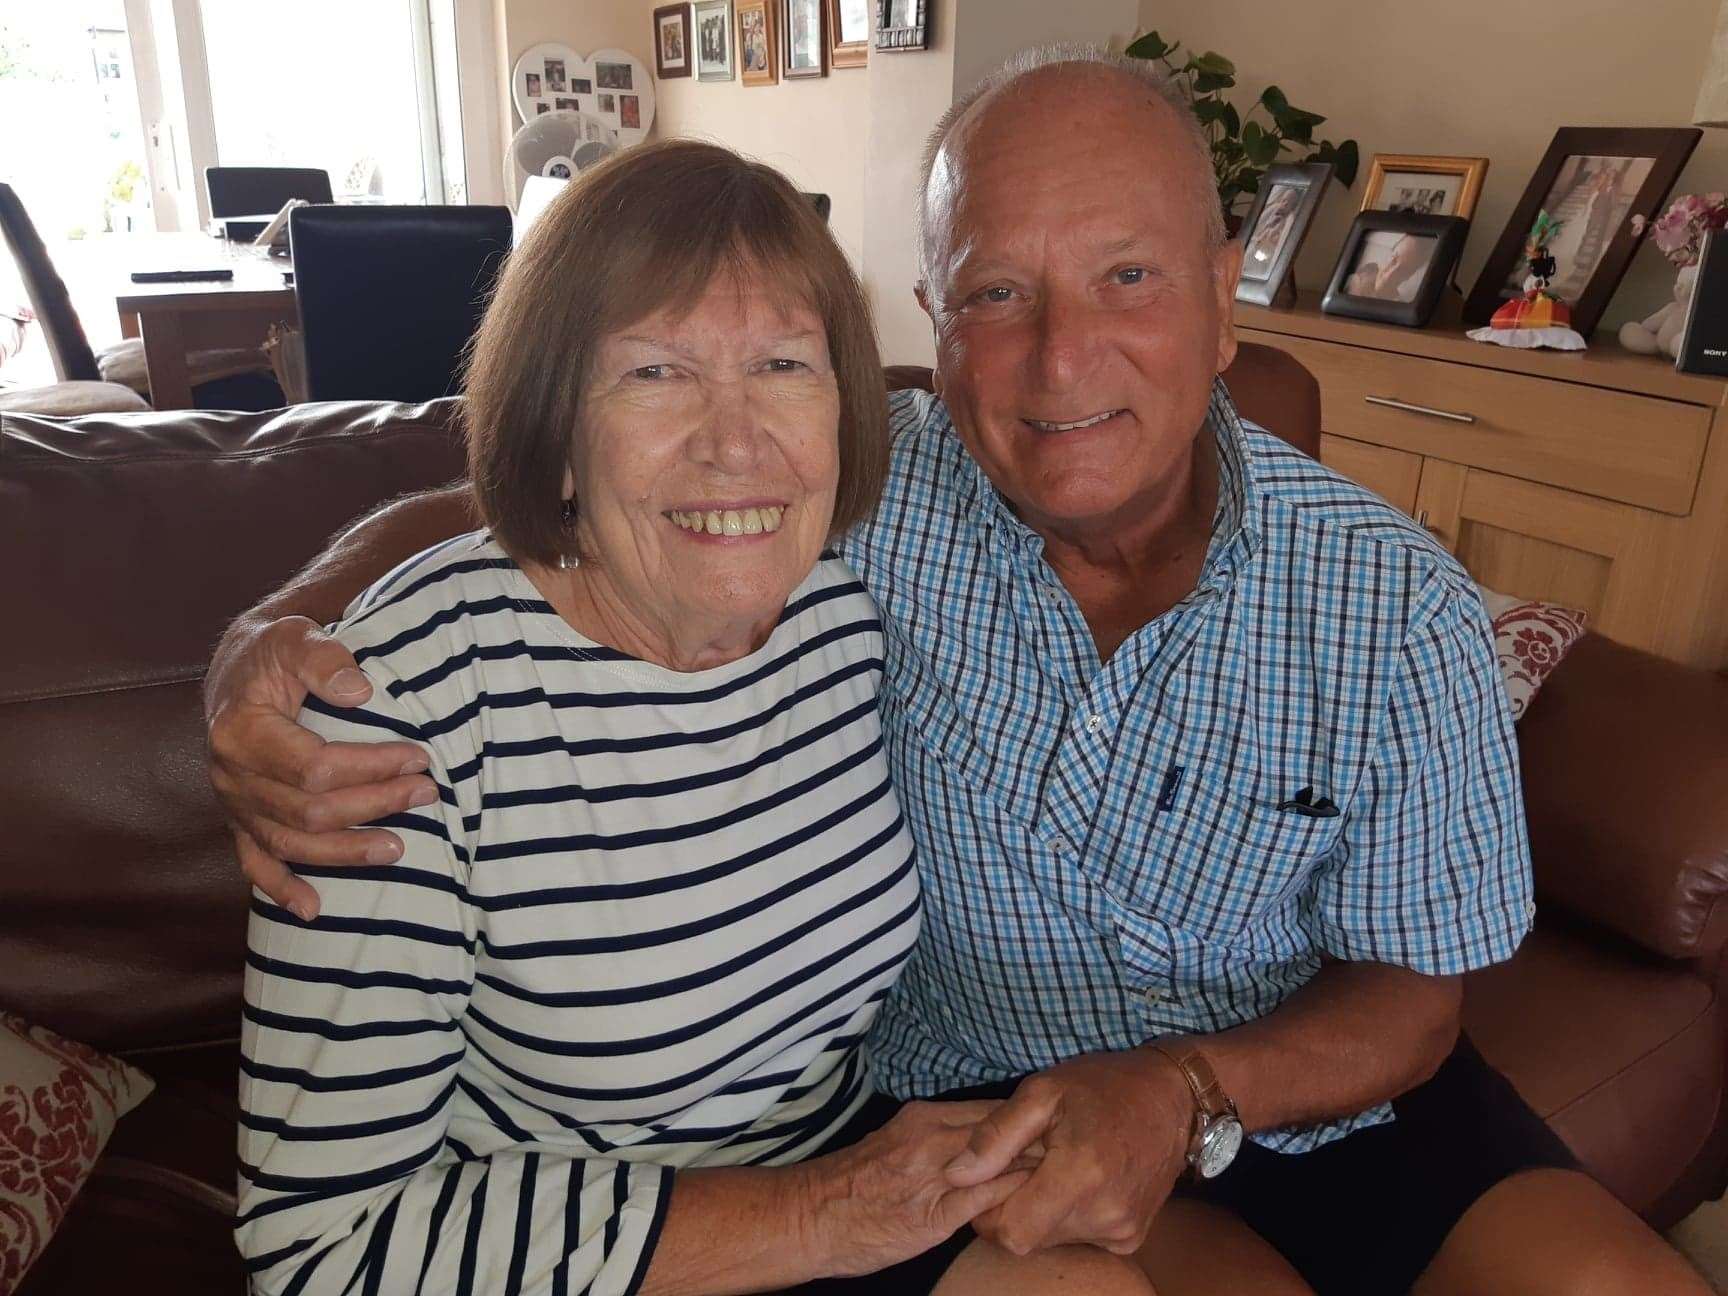 Gladys and Alan Relf celebrated their 50th wedding anniversary with a cruise